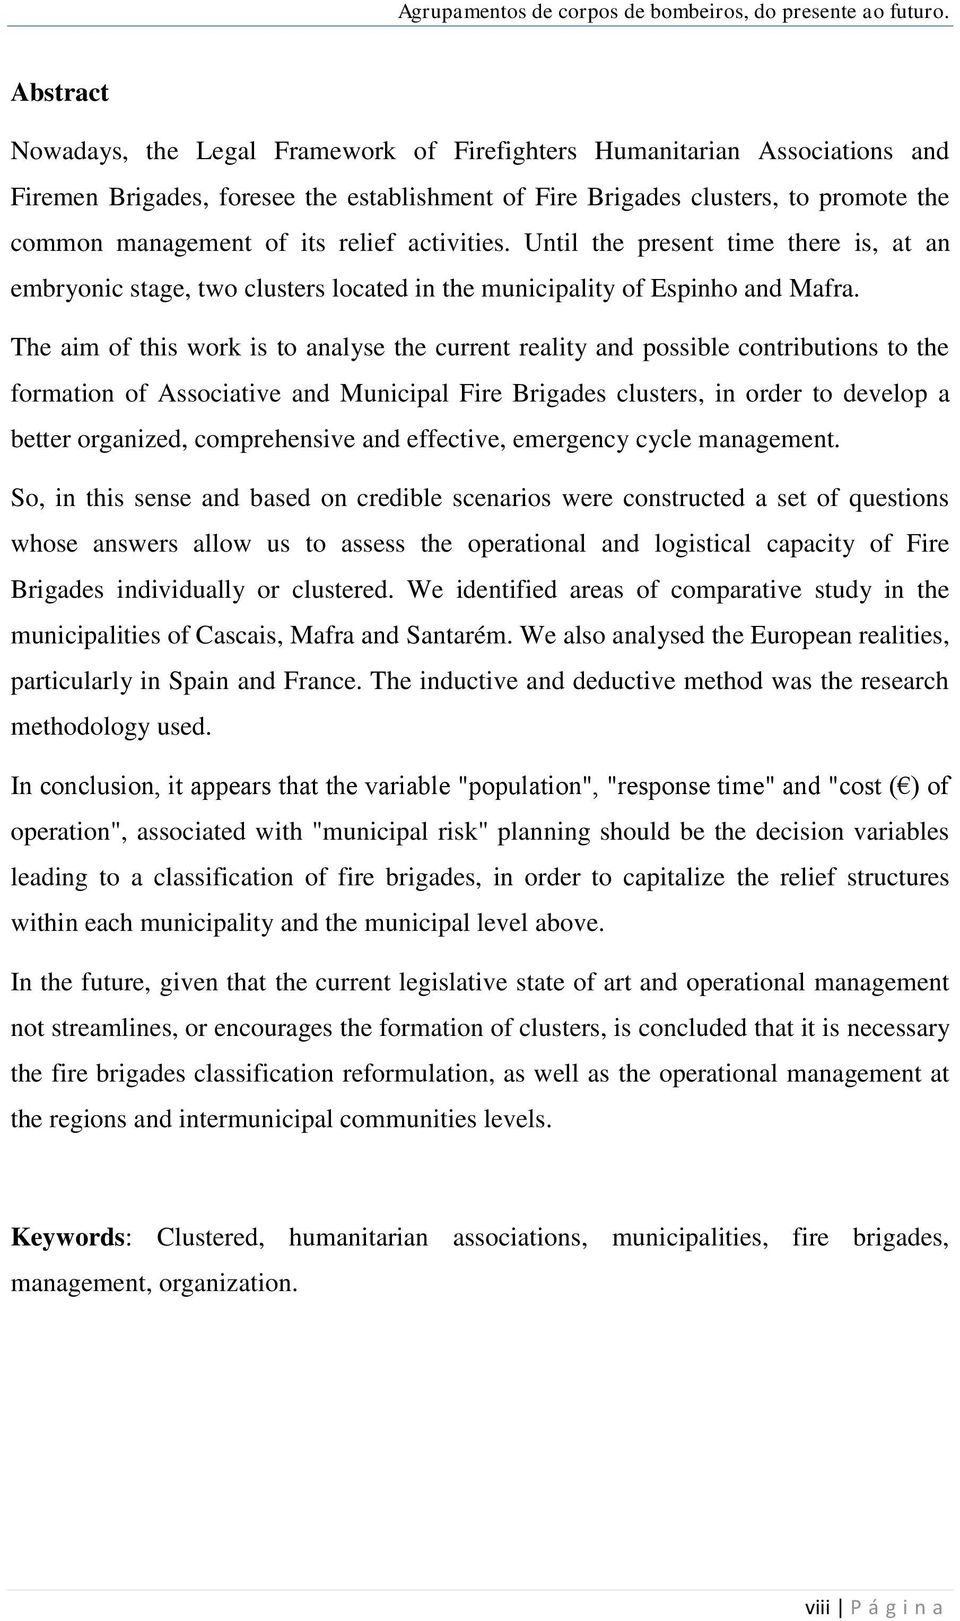 The aim of this work is to analyse the current reality and possible contributions to the formation of Associative and Municipal Fire Brigades clusters, in order to develop a better organized,